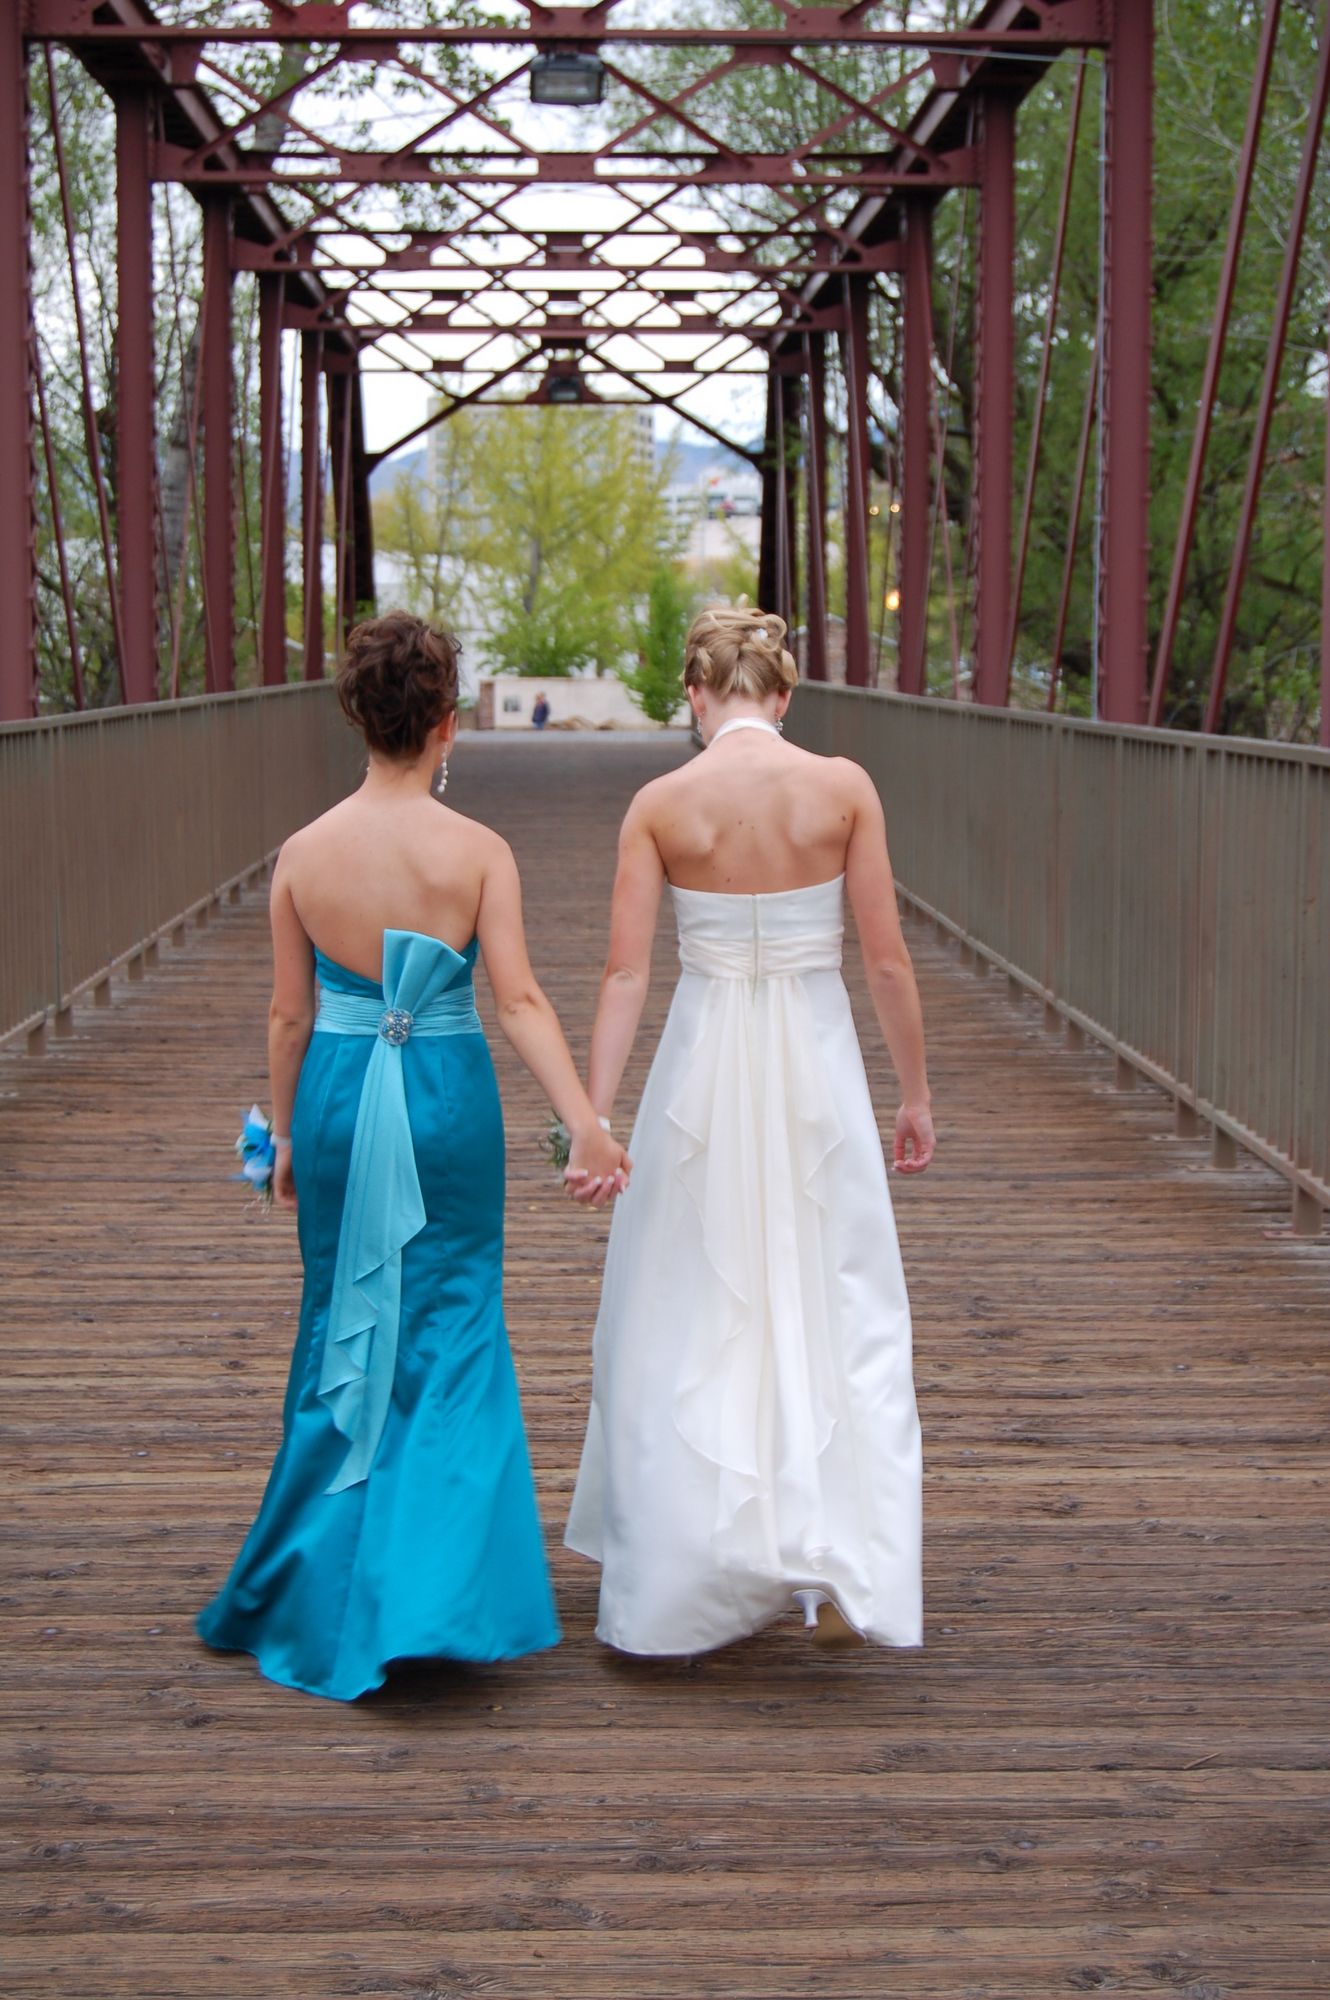 bride and bridesmaid pictures - Google Search | A Picture's Worth ...